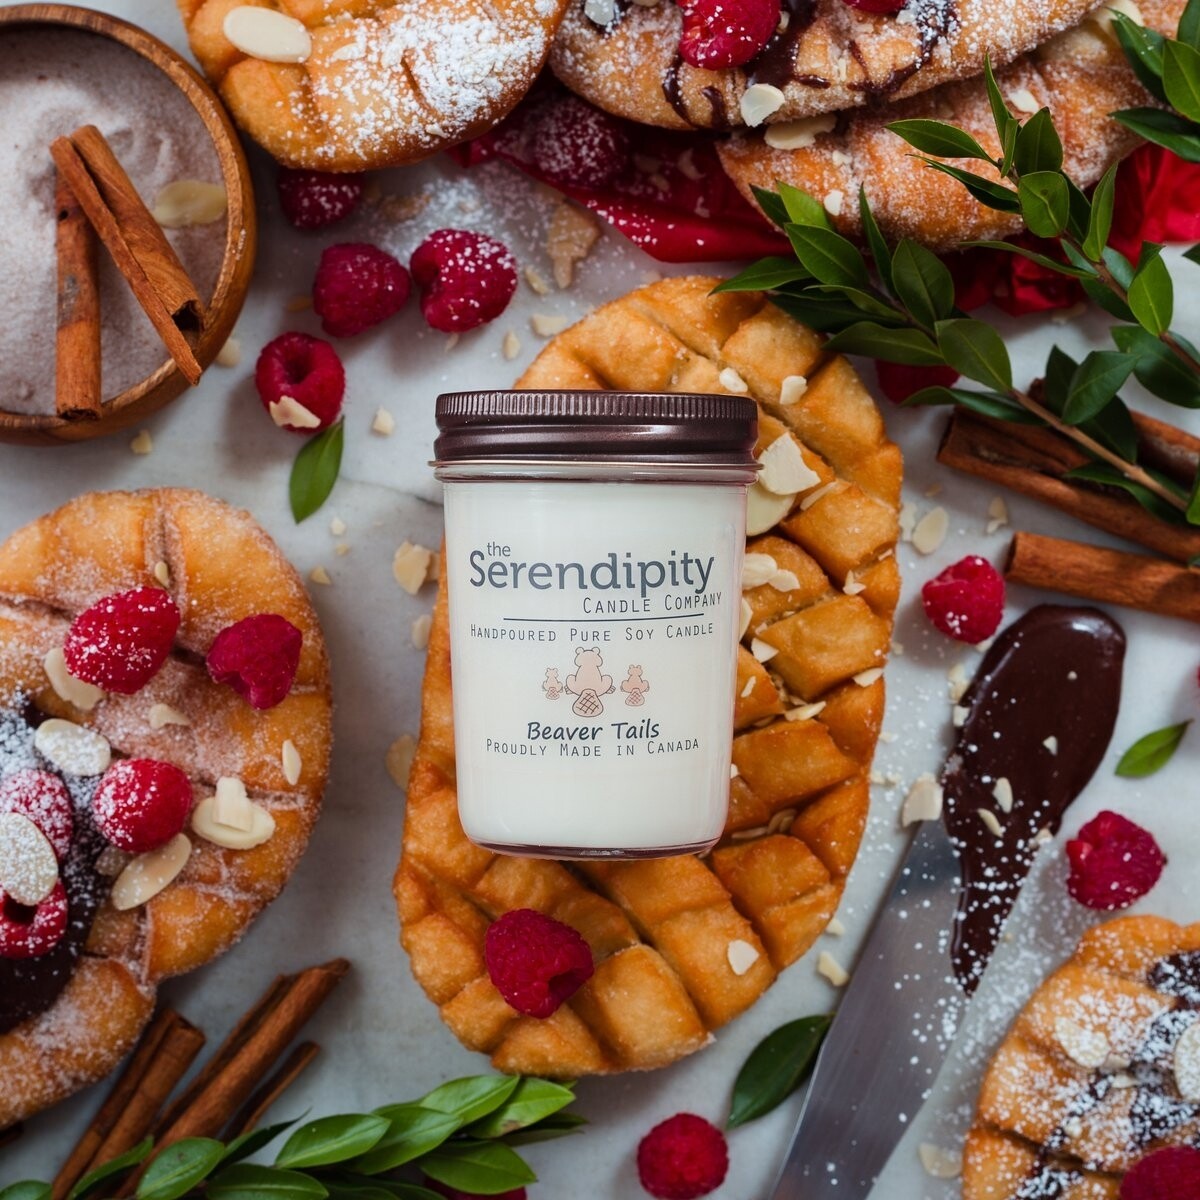 Serendipity 8 oz Soy Candle Jar | Beaver Tails